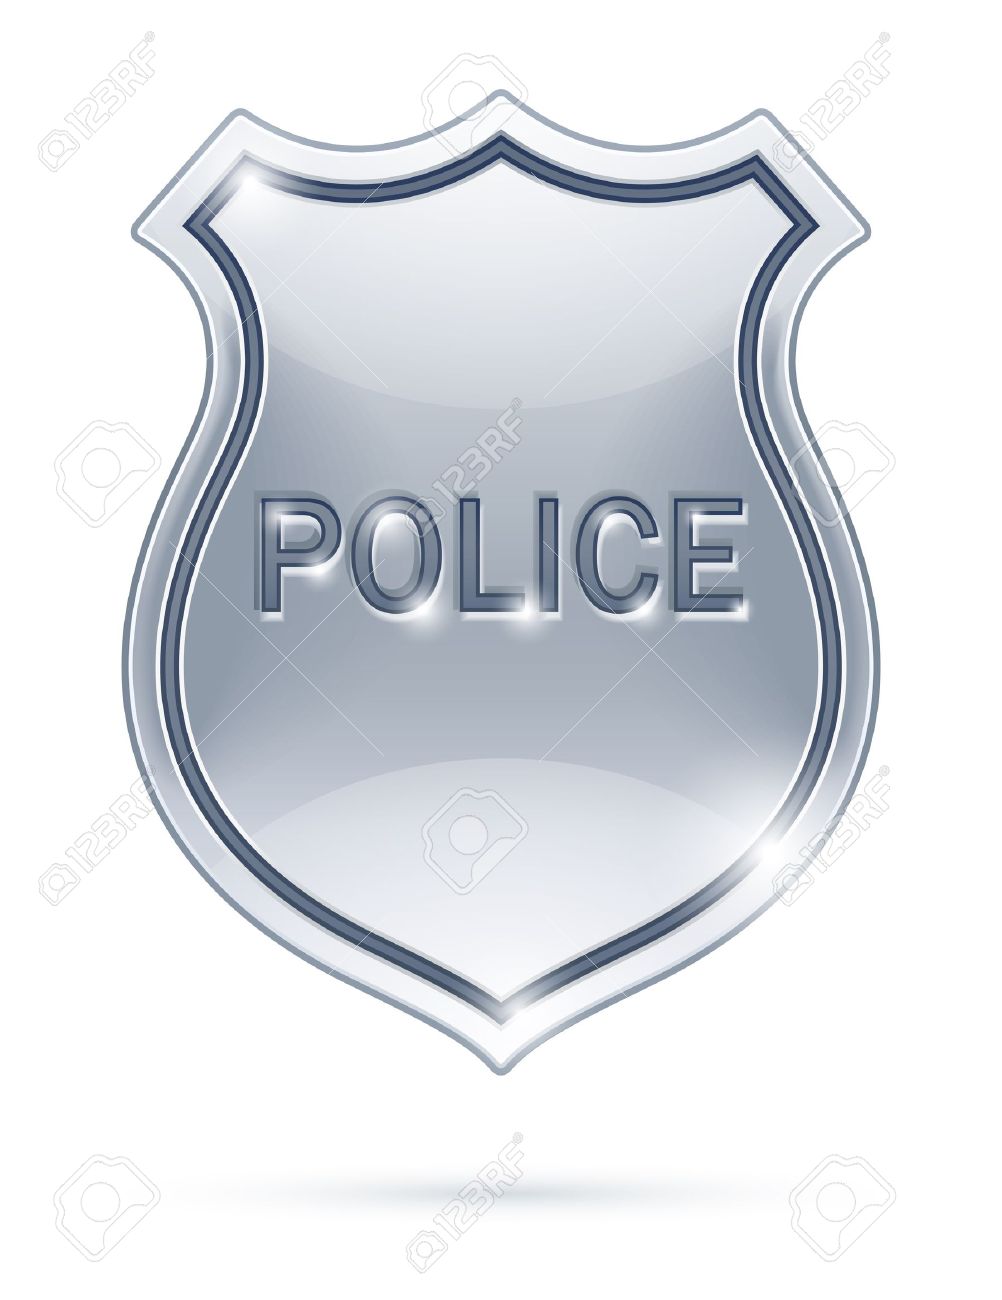 Police Badge Vector Illustration Isolated On White Background